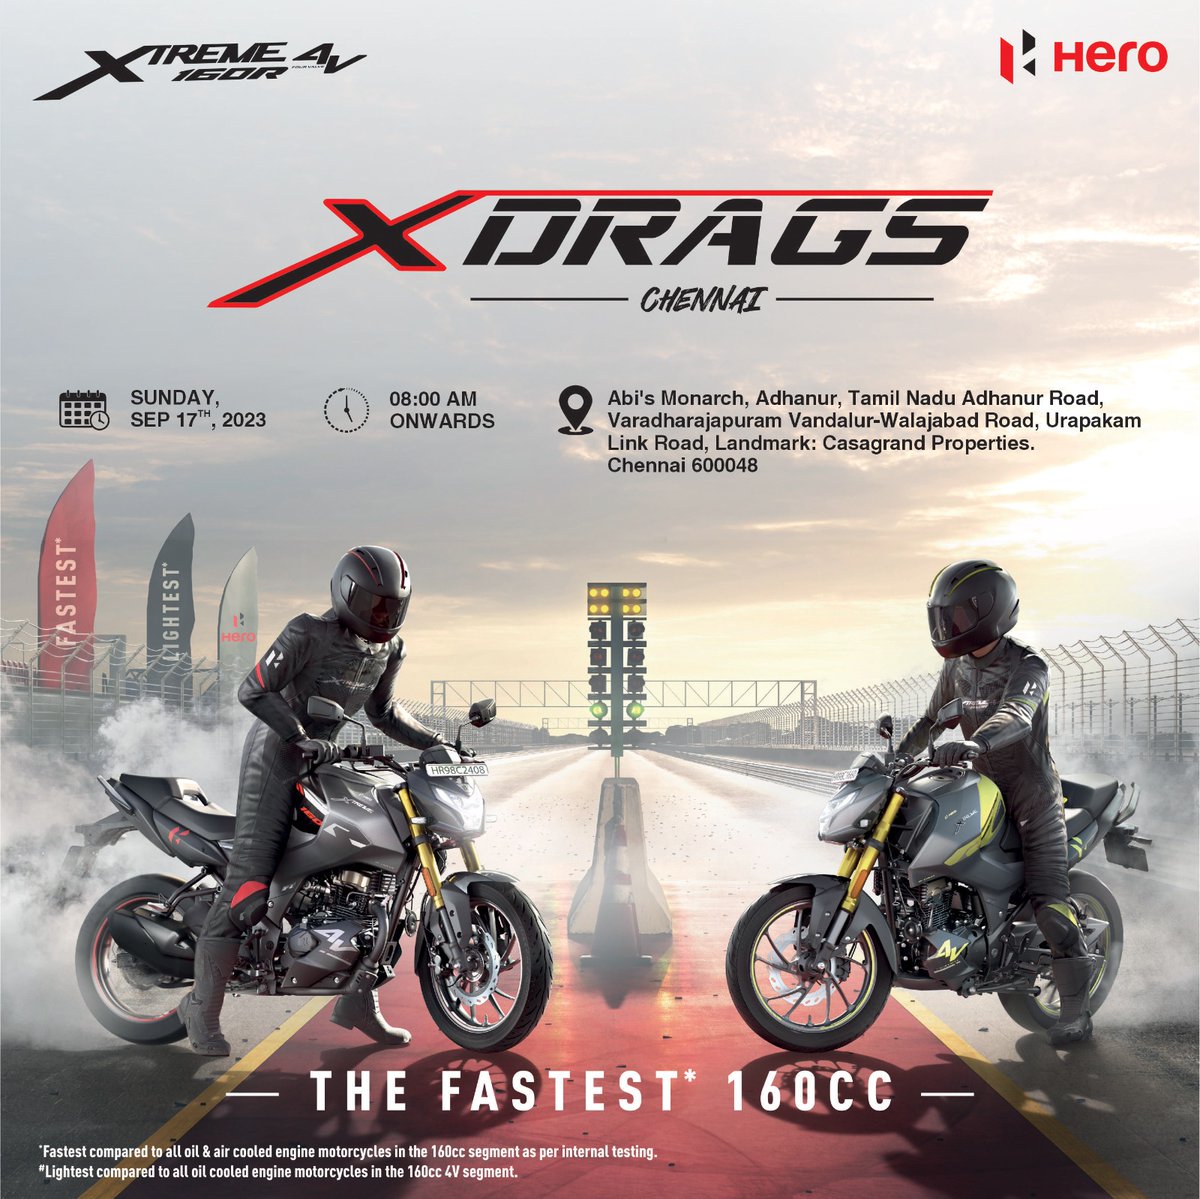 For all the speed demons out there!
Here’s #Xtreme160R4V - a bike that will make your drag dreams come true.

#MohanaHero #EveryDragstersDream #HeroMotoCorp #Chennai #Xtreme160R4V #Xtreme160R